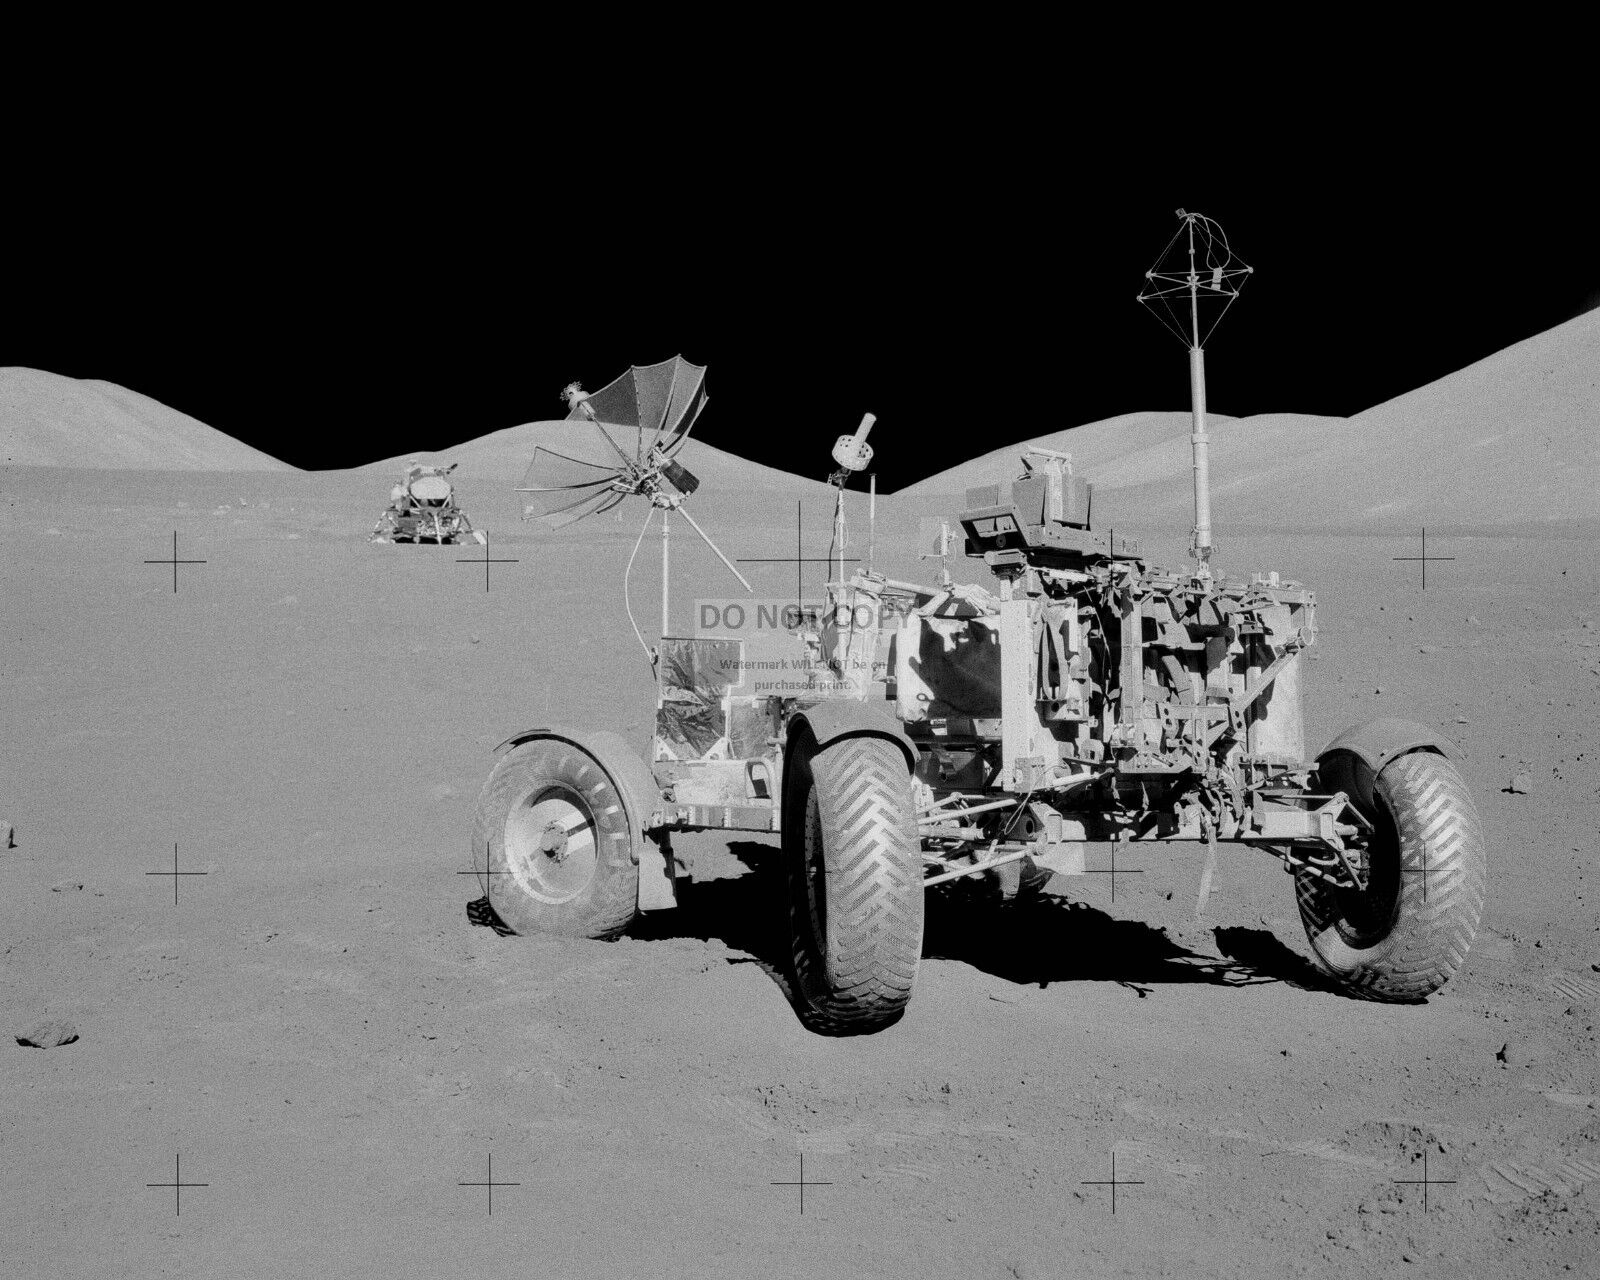 APOLLO 17 LUNAR ROVING VEHICLE AT FINAL MOON RESTING PLACE - 8X10 PHOTO (BB-074)